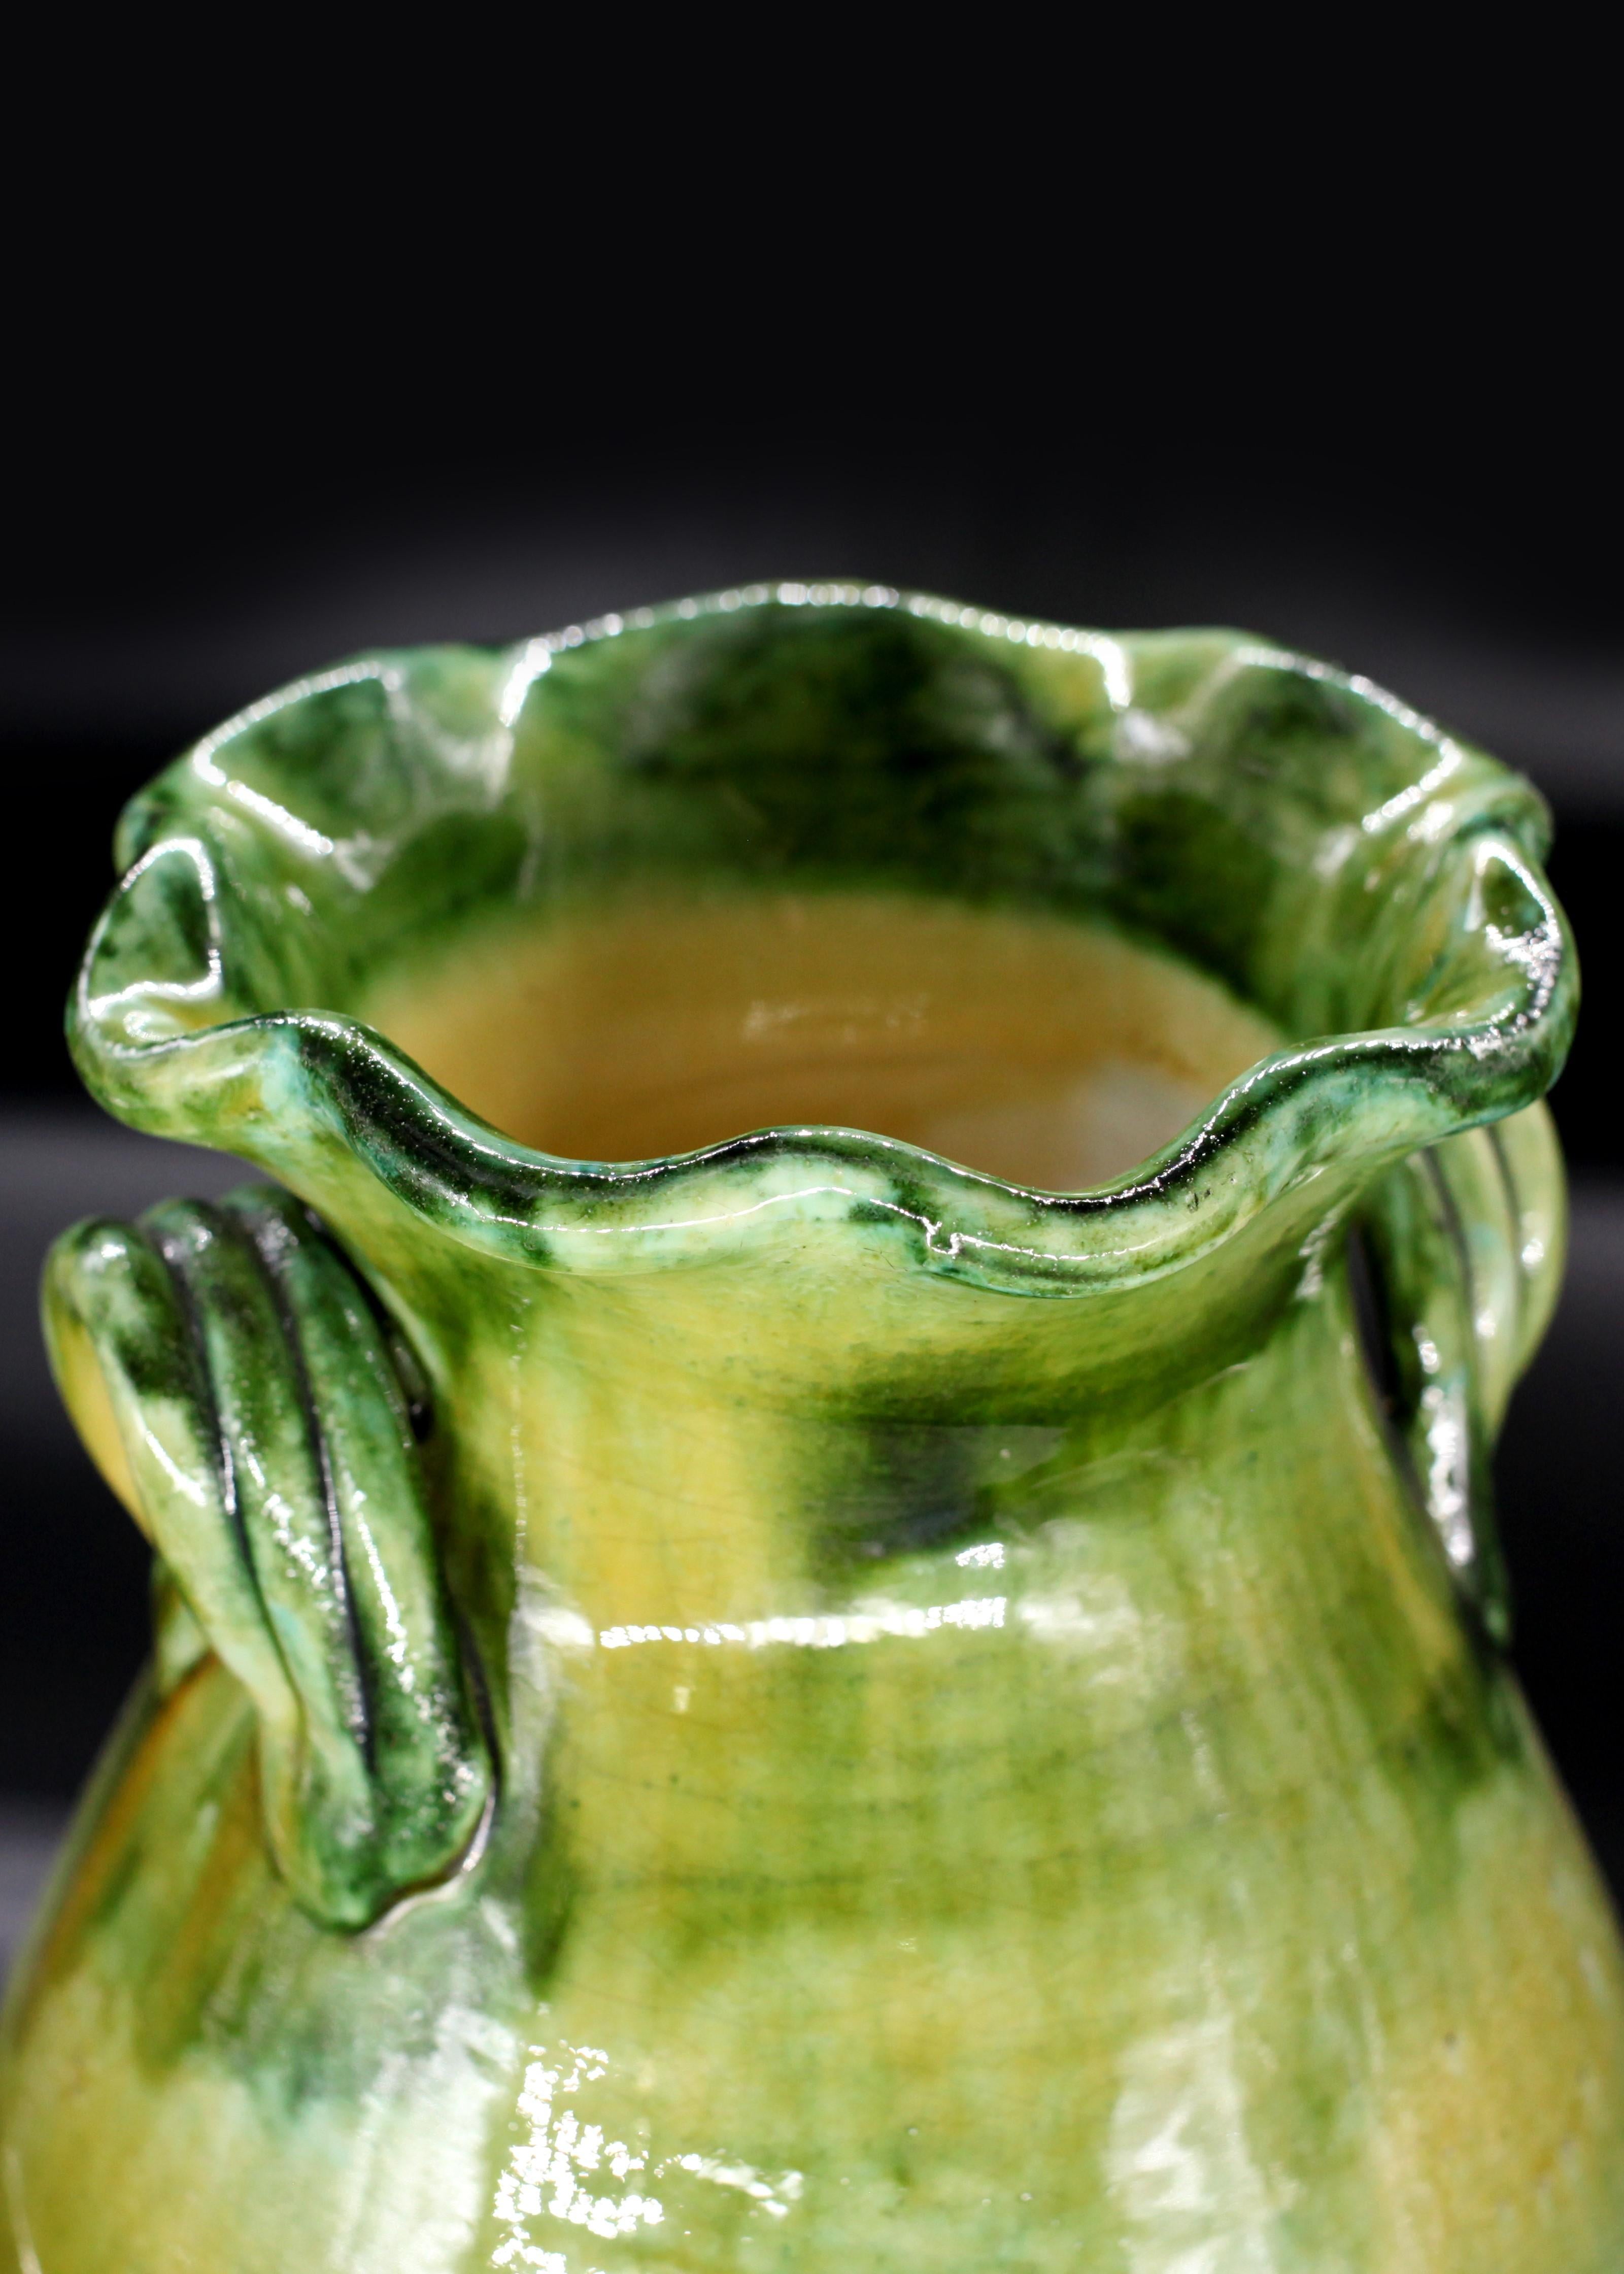 Bask in the glory of the 20th-century Italian art with this glazed Vietri vase. Sculpted to perfection and glazed for added aesthetics, it's more than just a holder for your flowers, it's a celebration of Italian ceramic artistry.

CONDITION: VERY